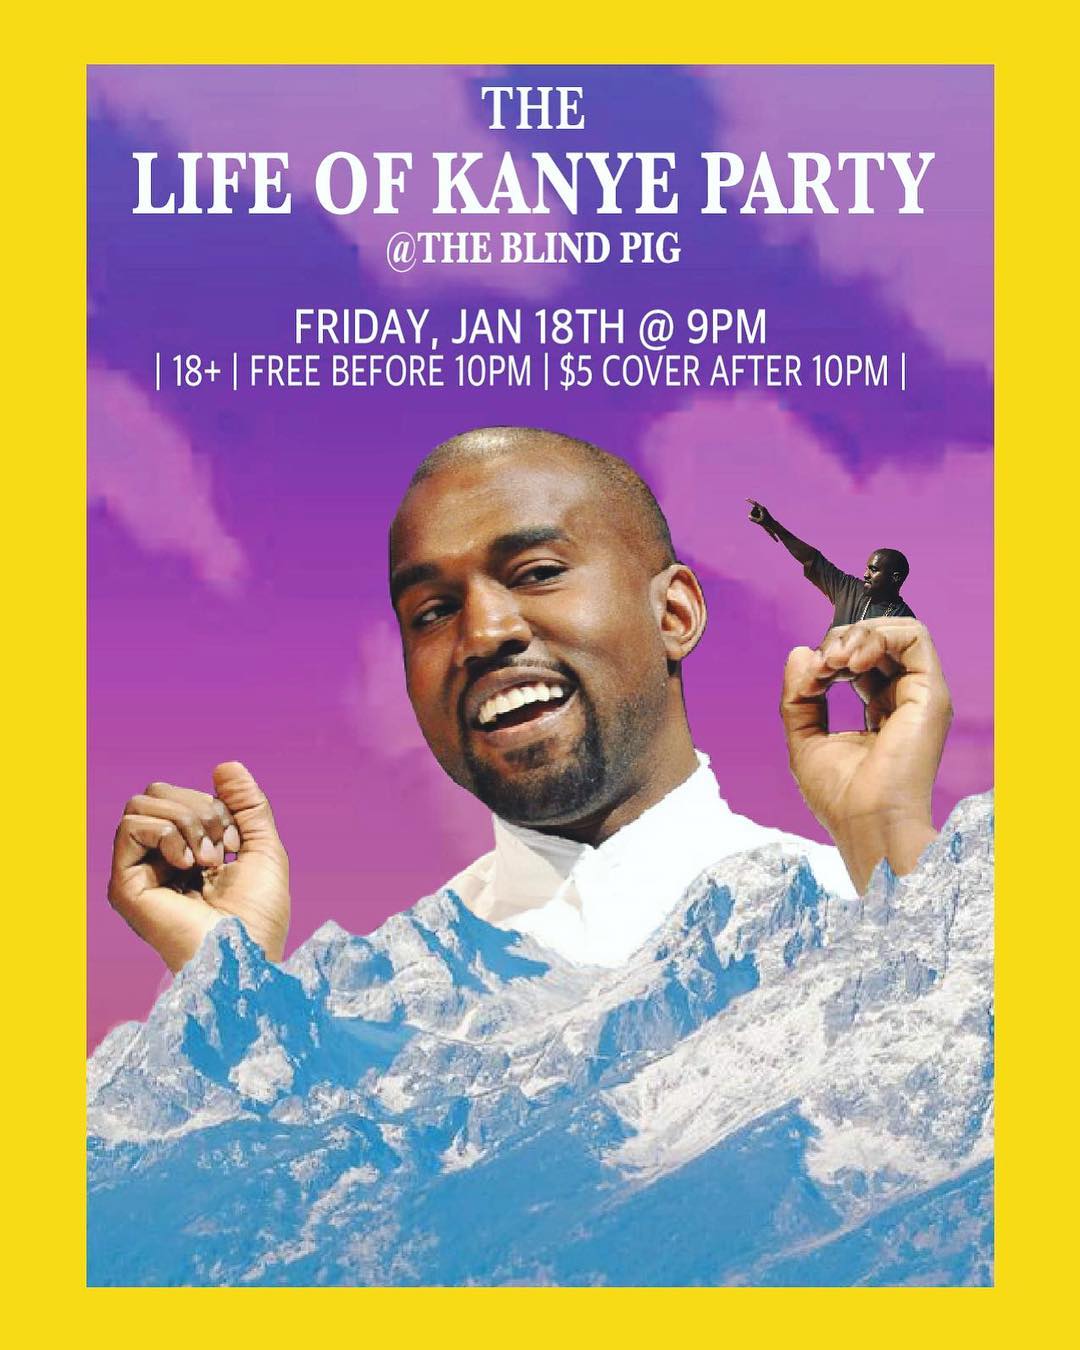 LIFE OF KANYE DANCE PARTY Blind Pig with DJ Ell